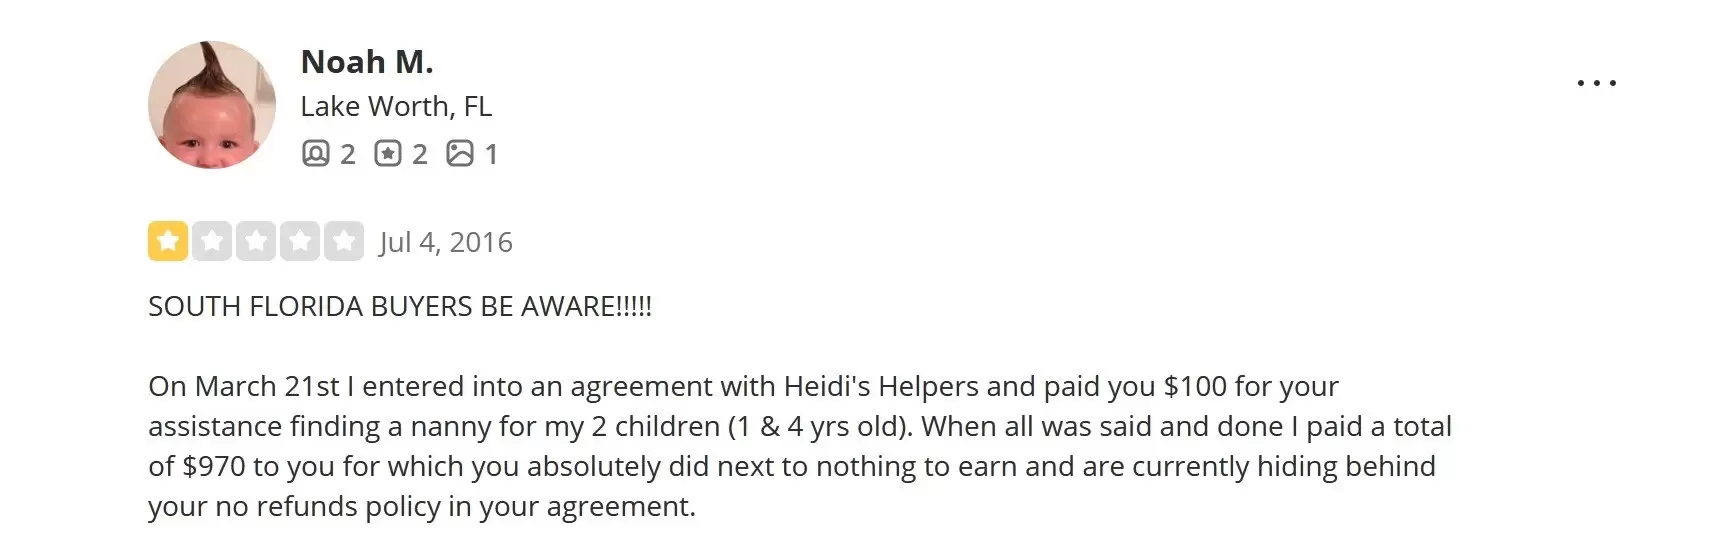 critical review of Heidi's Helpers Inc